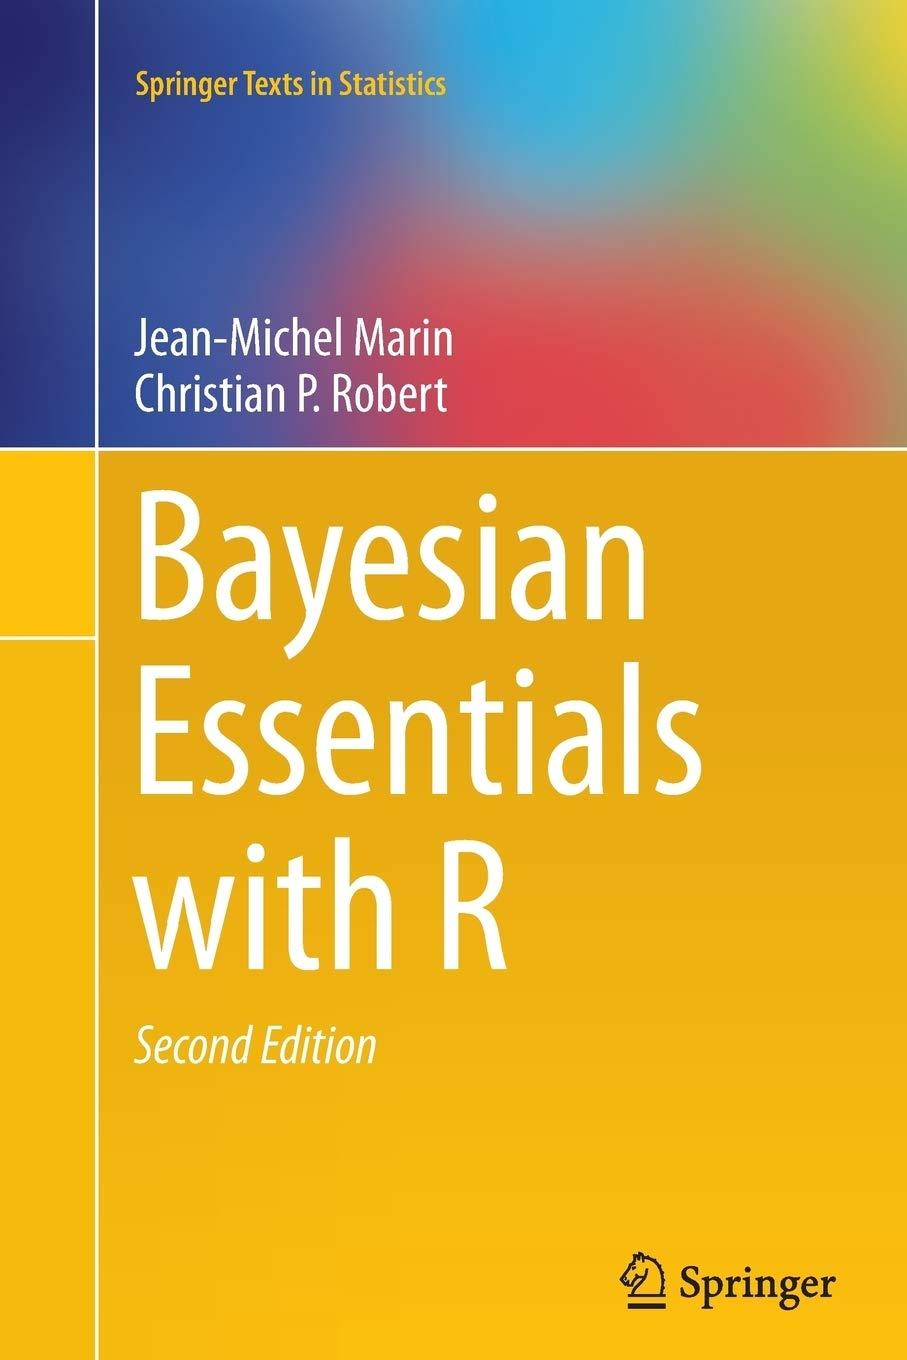 bayesian essentials with r 2nd edition jean-michel marin, christian p. robert 1493950495, 9781493950492